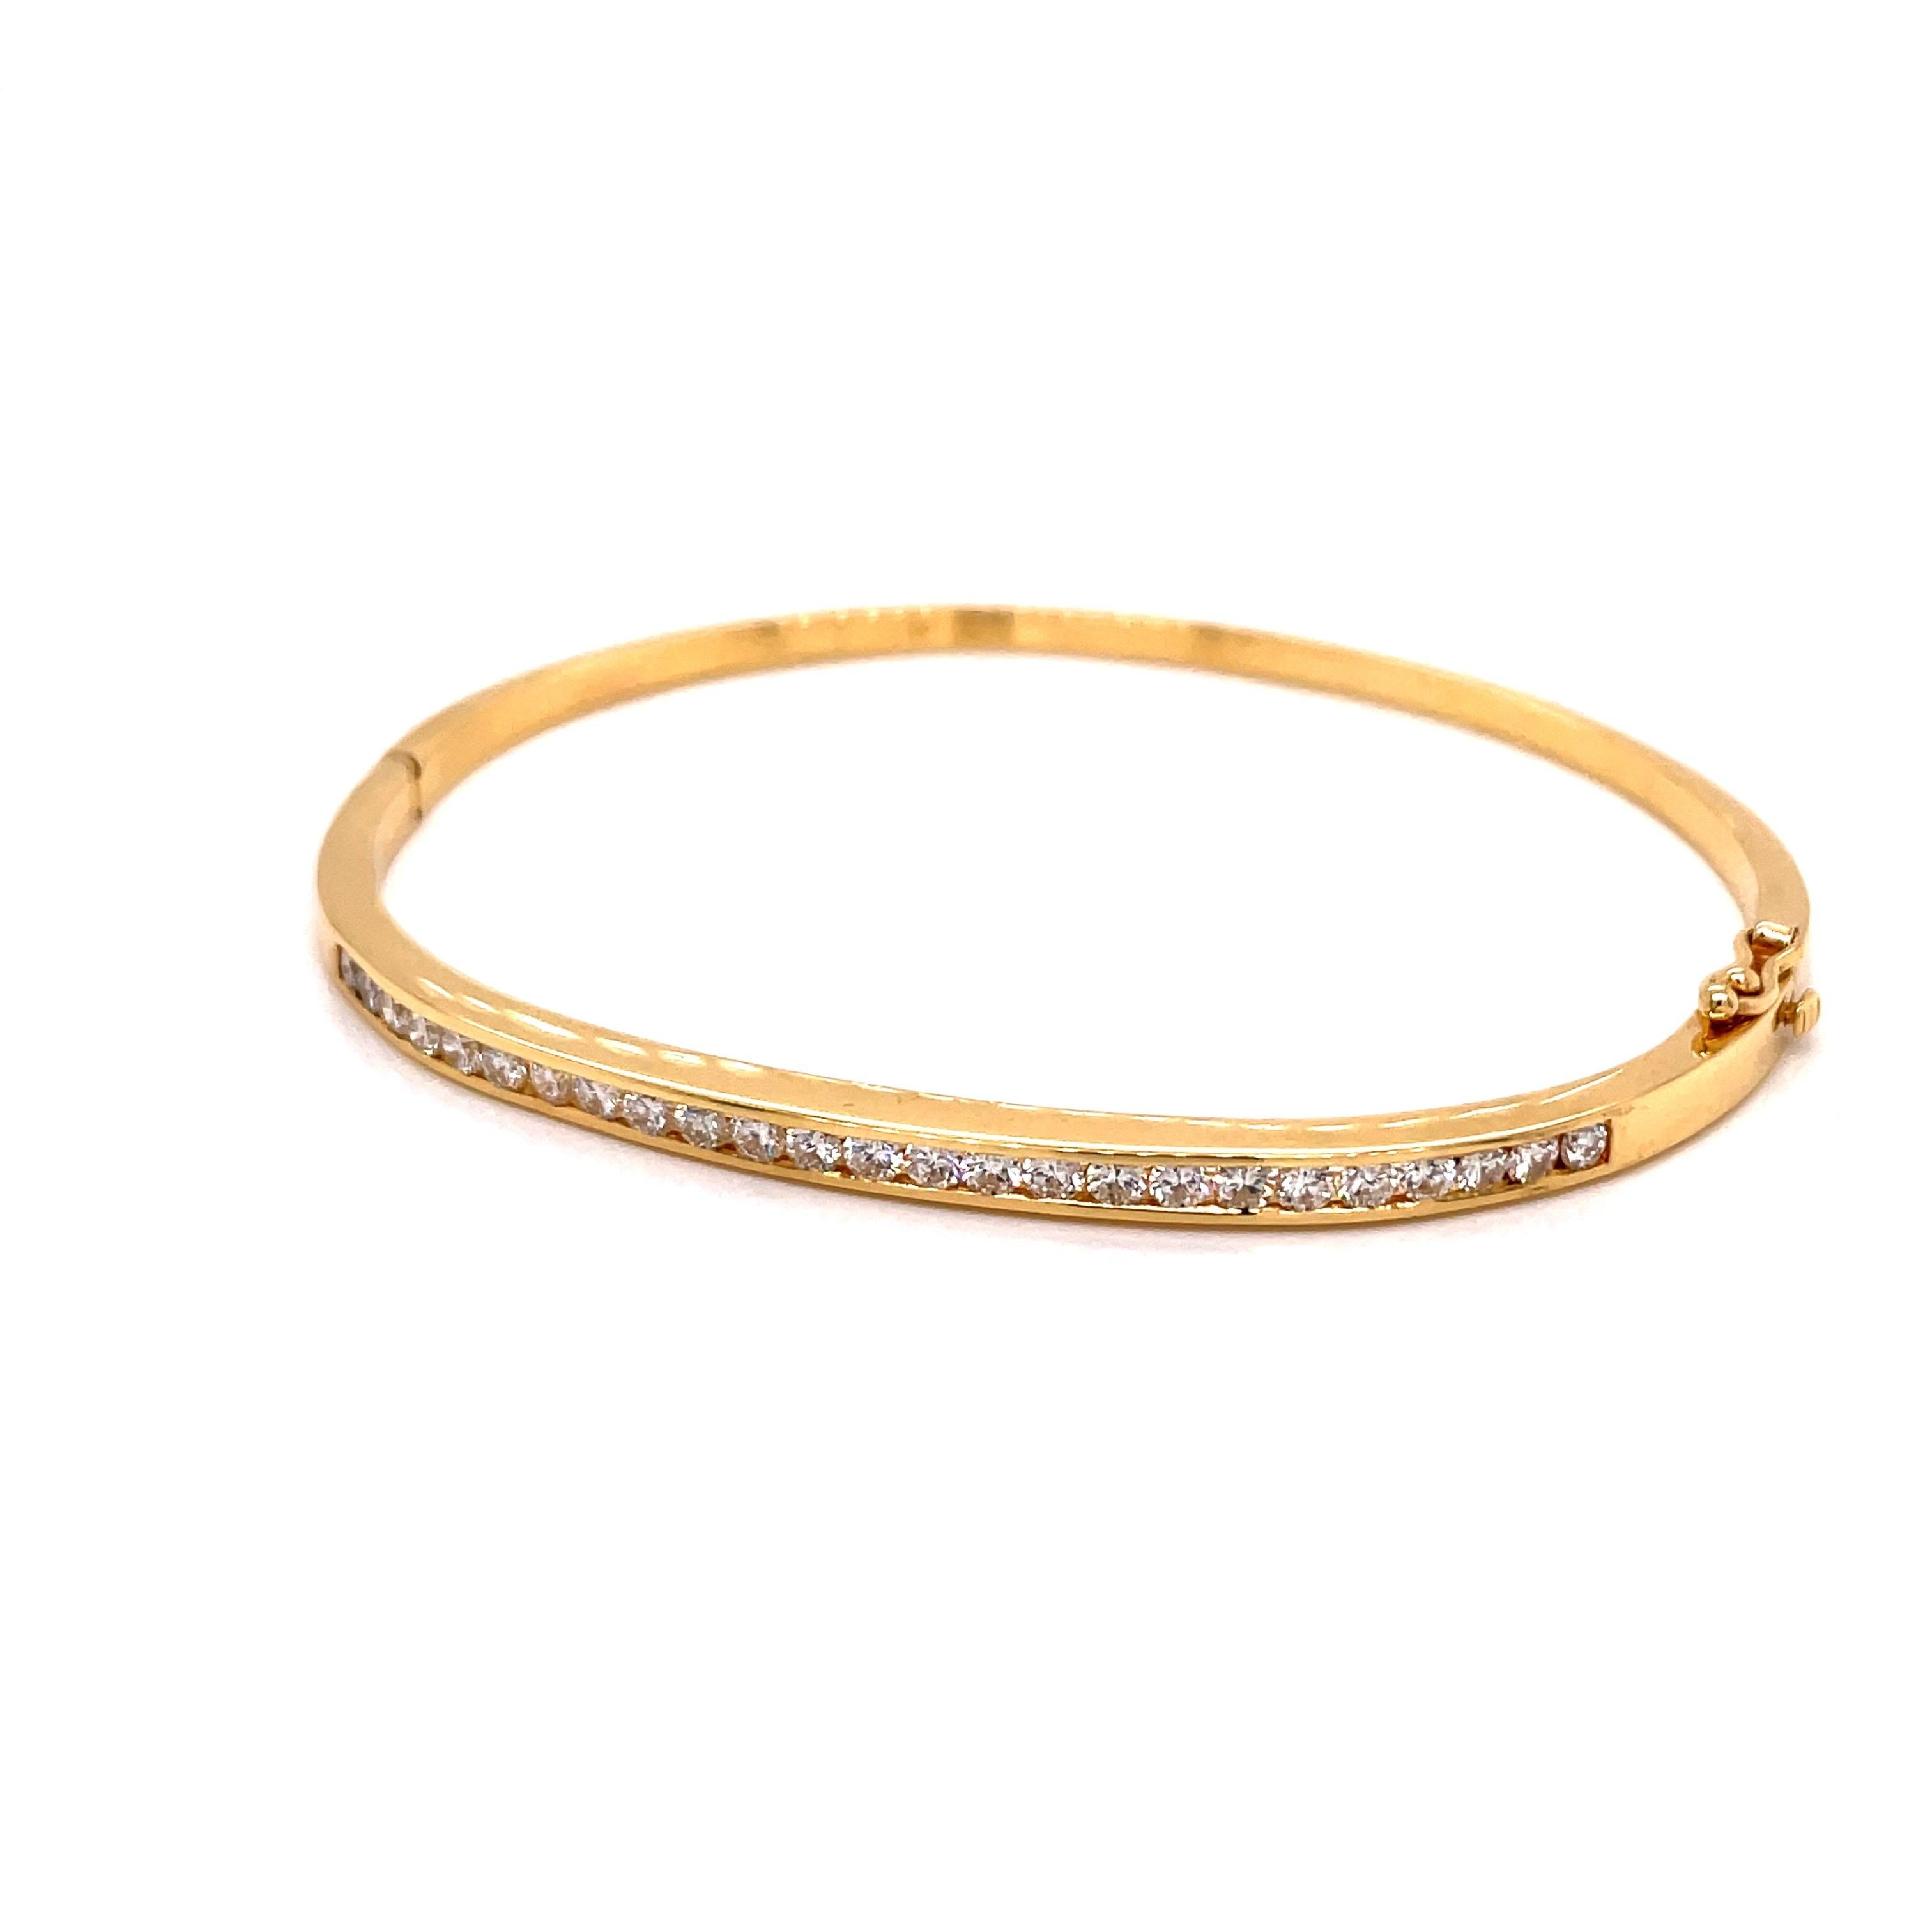 18K Yellow Gold Bangle Bracelet Channel Set Diamonds - The bangle contains 25 round brilliant diamonds weighing approximately 1.50ct. The diamonds are G-H color and VS clarity. The bangle measures 3.5mm wide on the top and 2.3mm wide on the bottom.